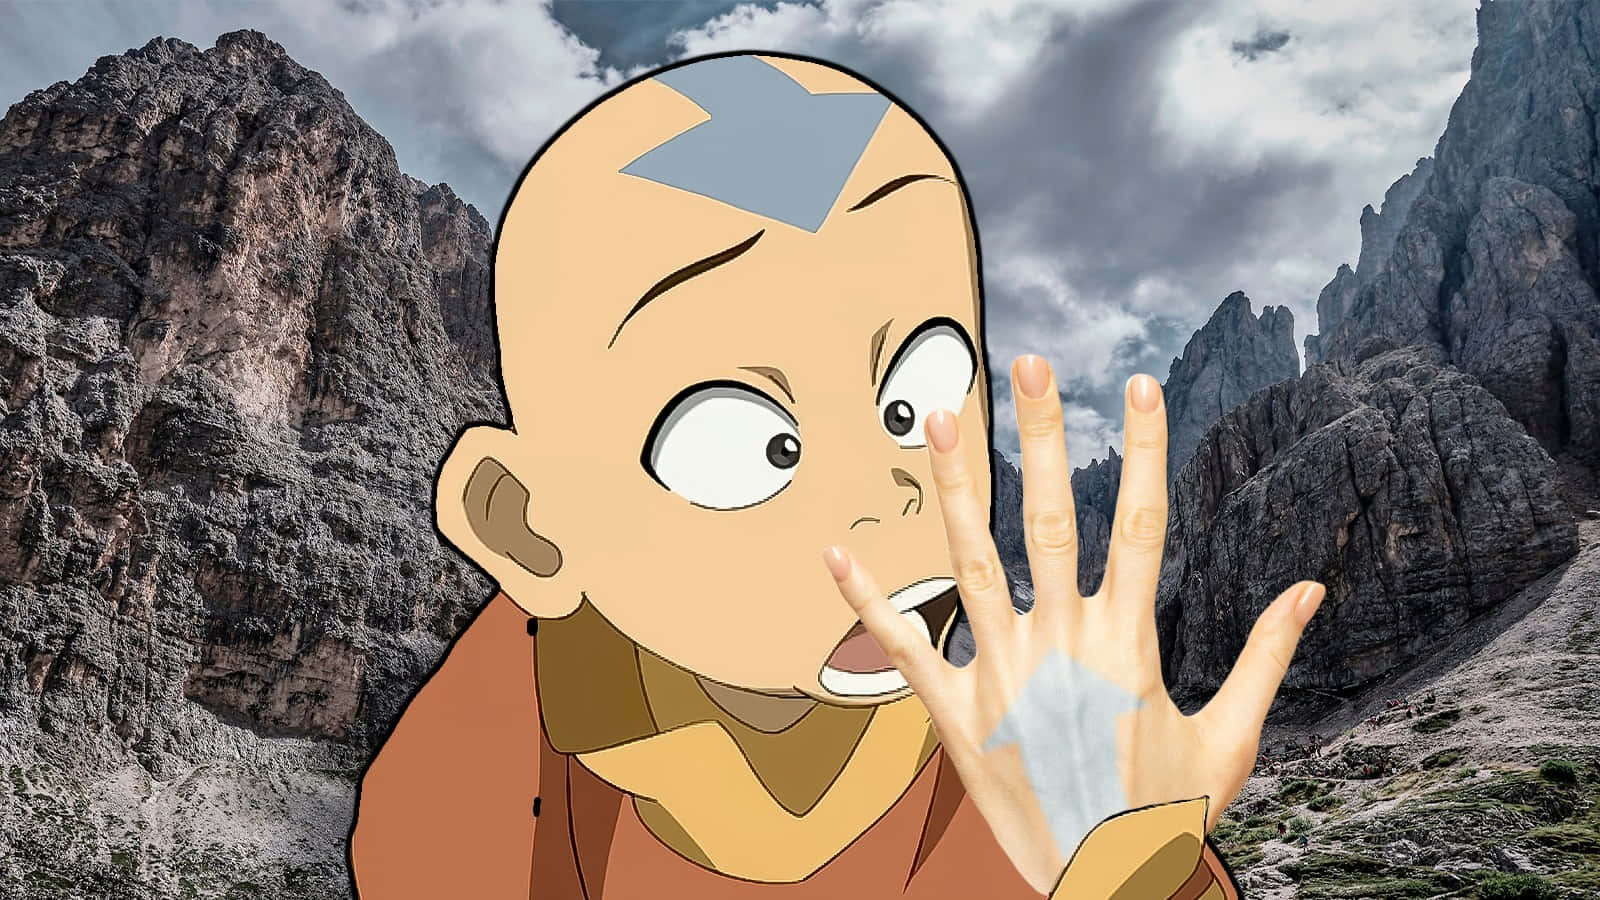 "The Airbender, Avatar Aang in Battle"